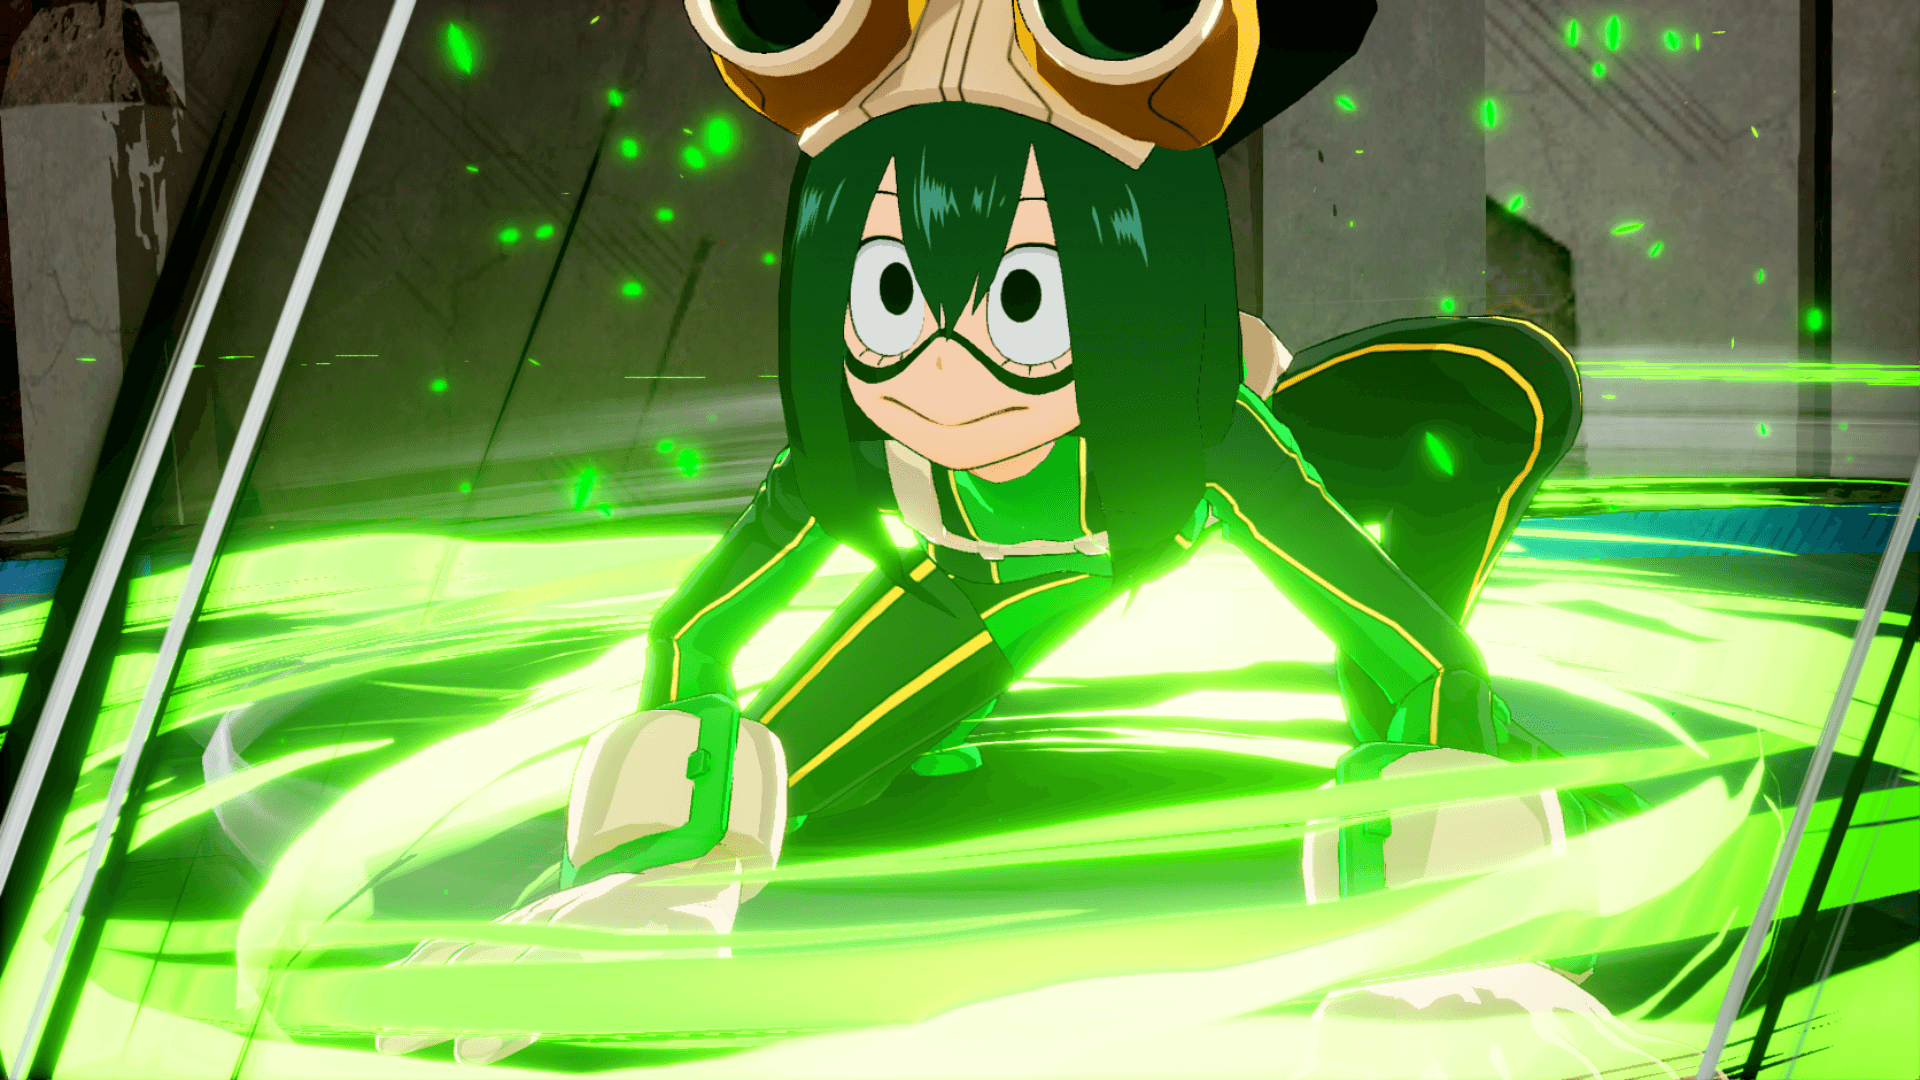 Tsuyu, Denki, and Momo join the My Hero Academia: One's Justice